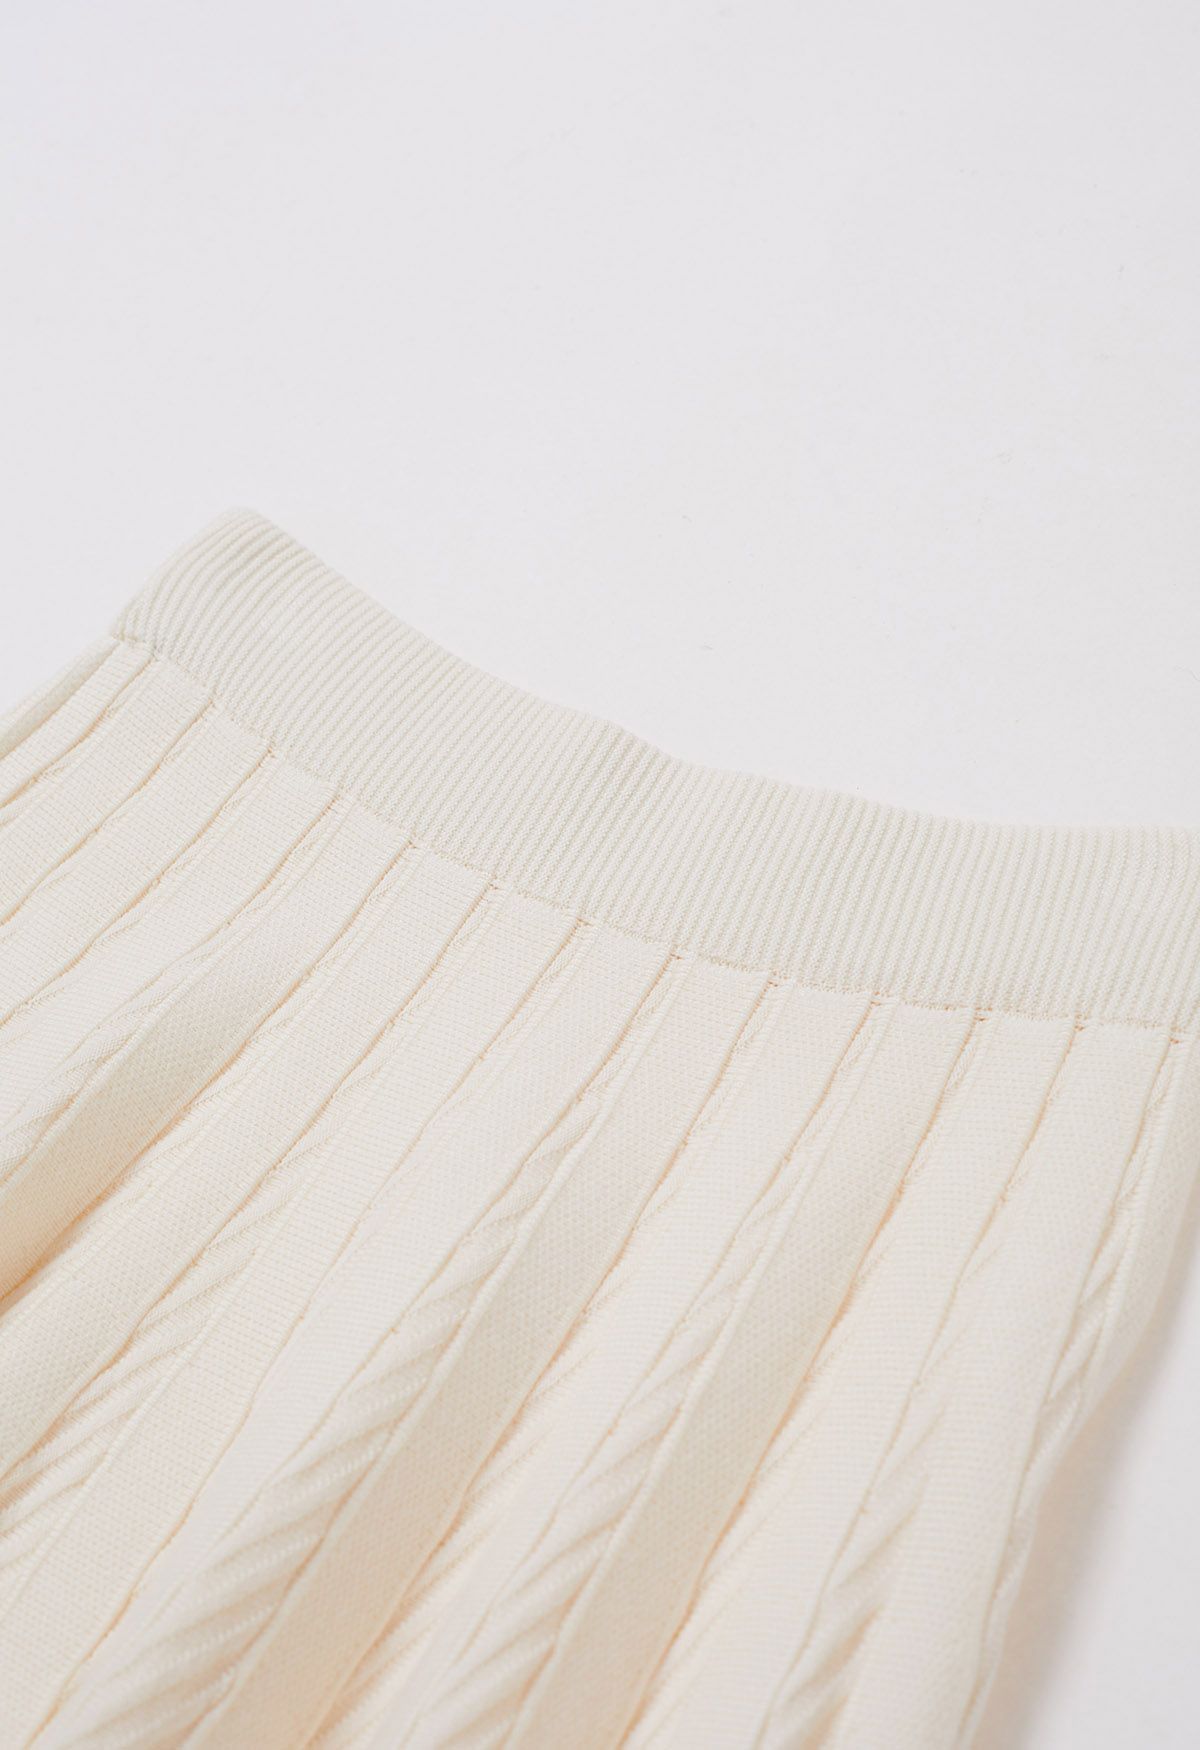 Diagonal Ribbed Pleated Knit Skirt in Cream